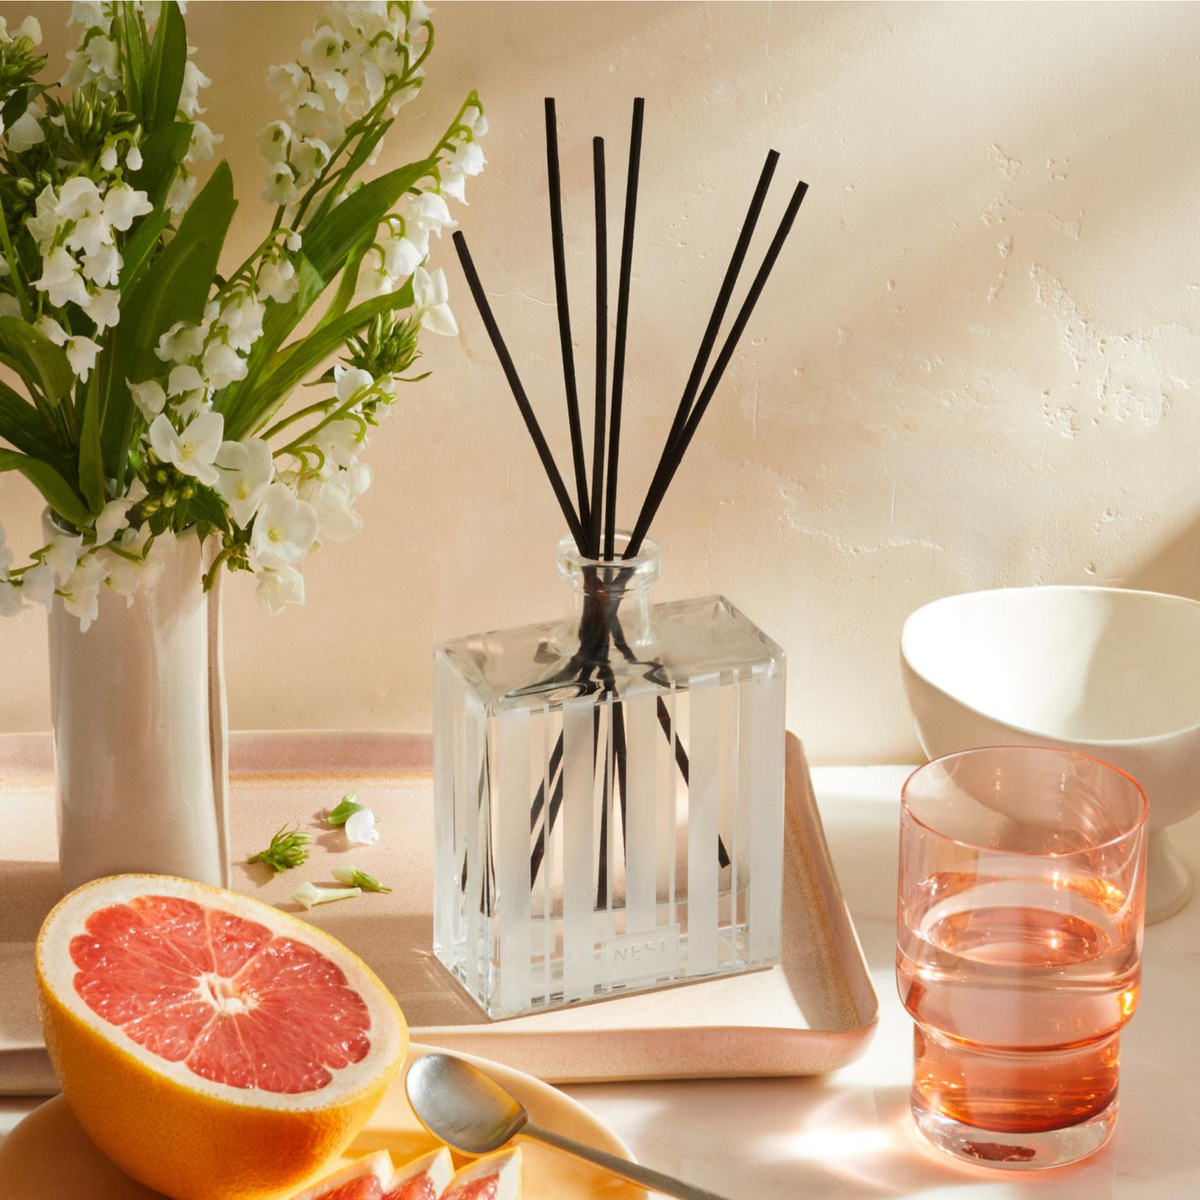 Nest New York’s Grapefruit Reed Diffuser Lifestyle in Tray on Counter